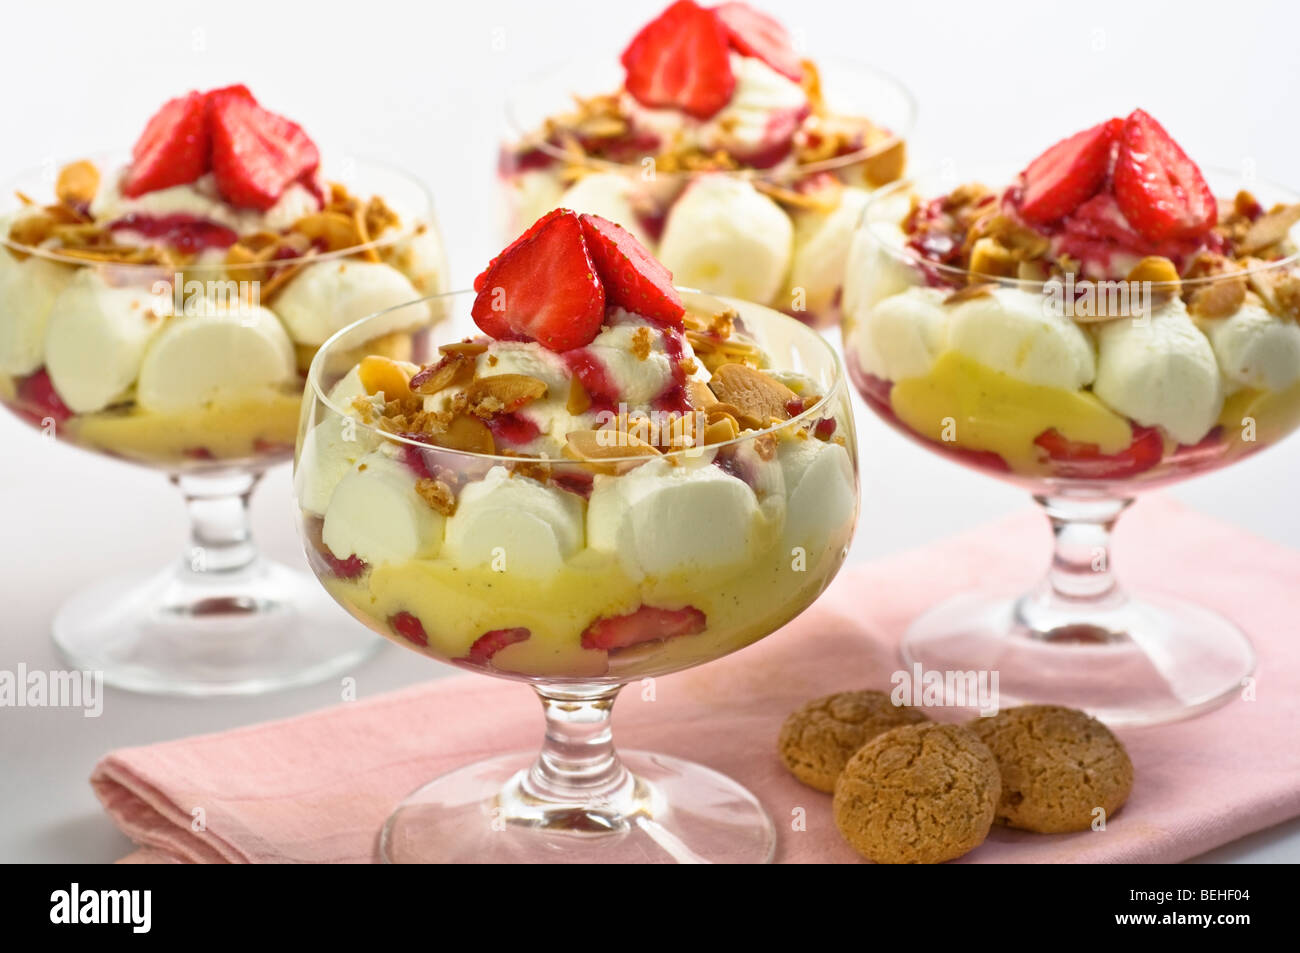 Trifle with strawberries Dessert Food Stock Photo